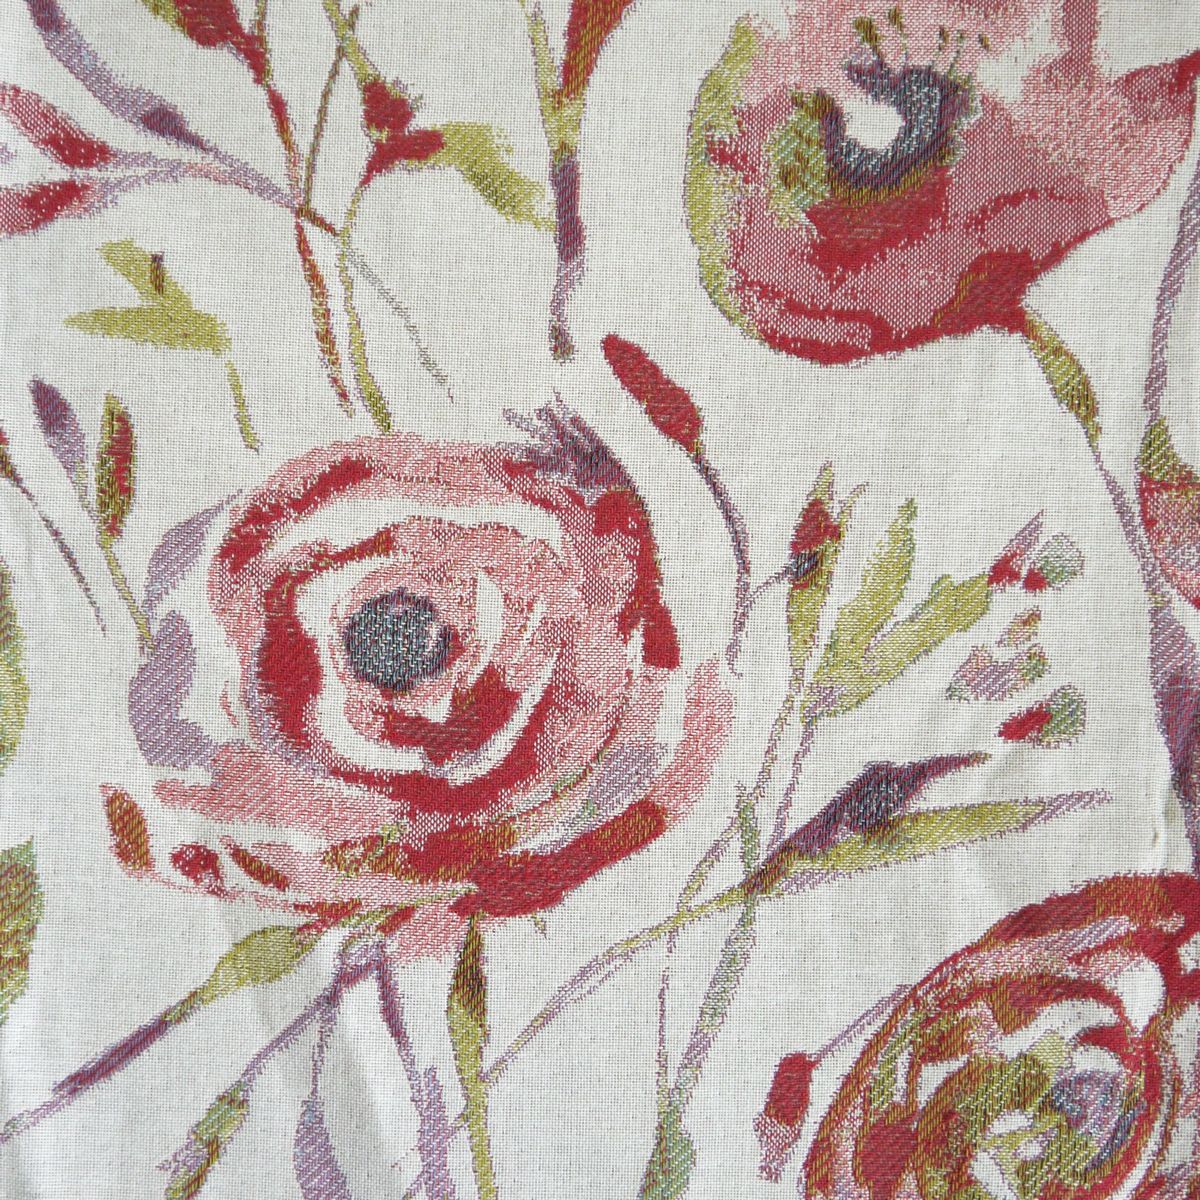 Meerwood Poppy Fabric by Voyage Maison